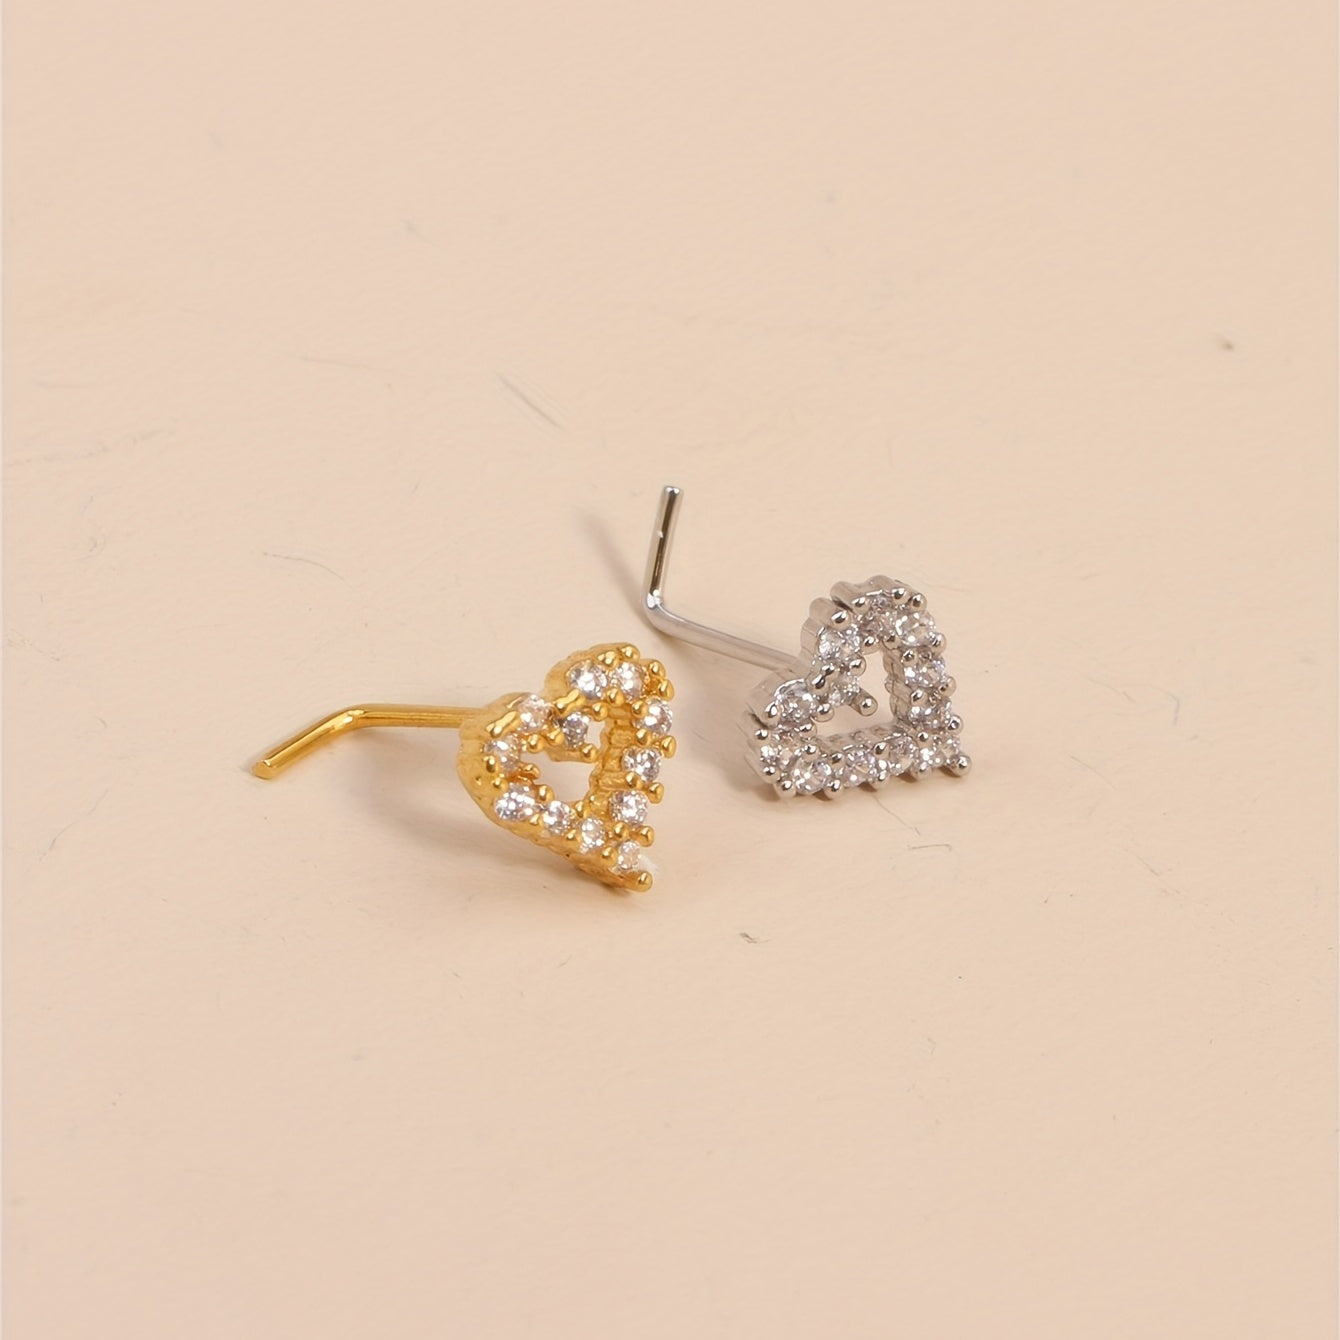 Small Hollow Out Love Heart Shape Nose Studs Rings For Women Nose Piercing Jewelry 18K Gold Plated Copper Nose Nail Inlaid Shiny Zircon